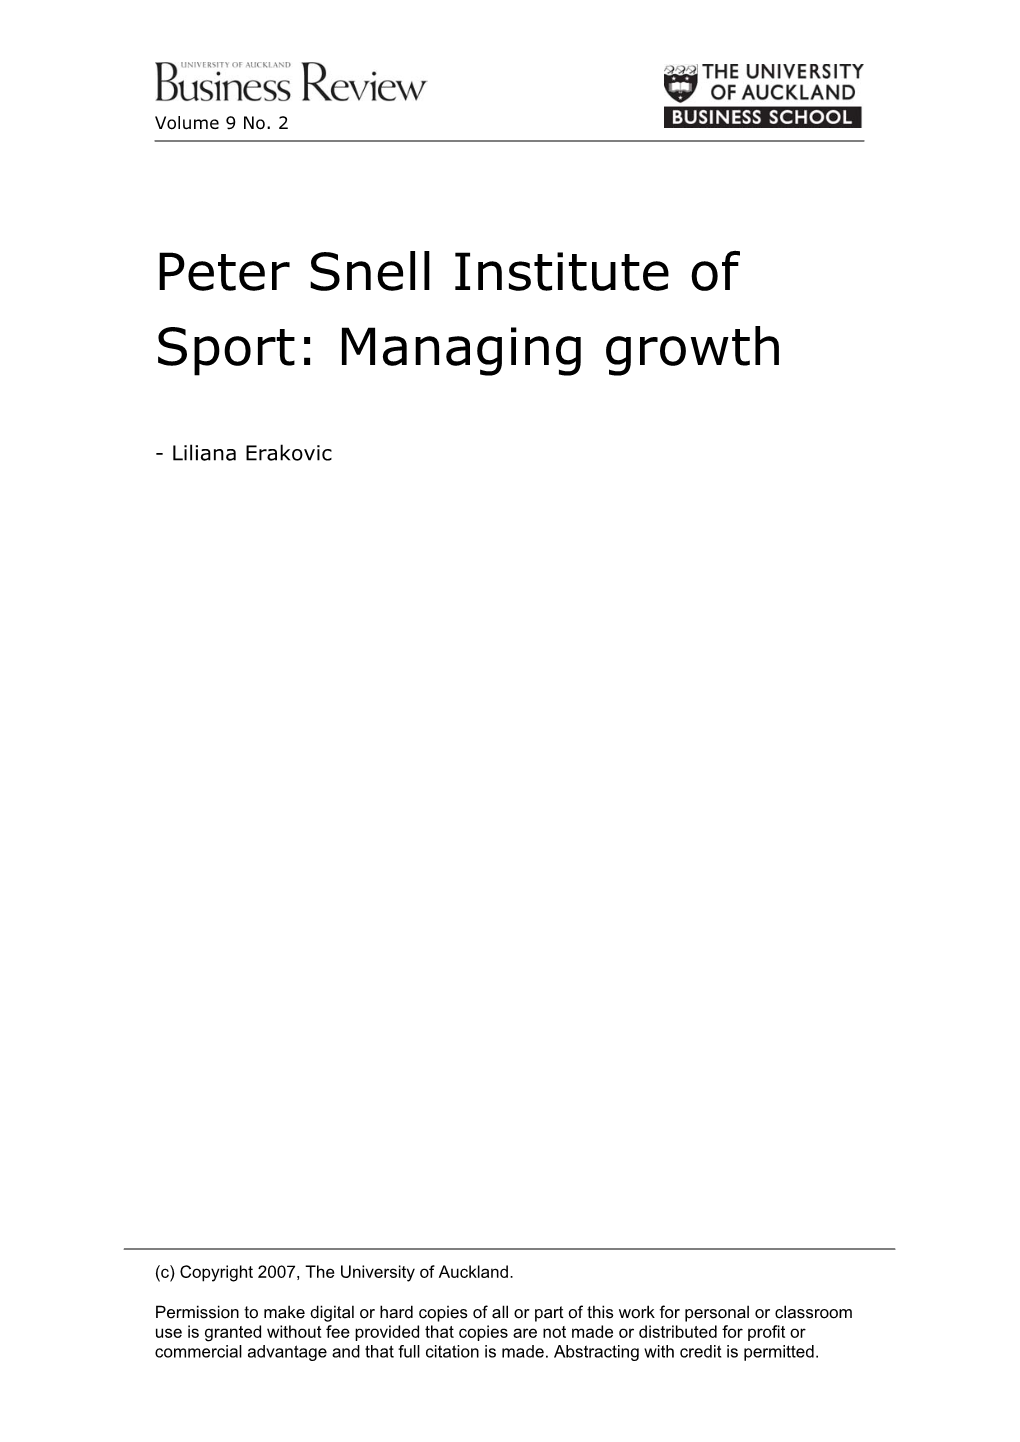 Peter Snell Institute of Sport: Managing Growth